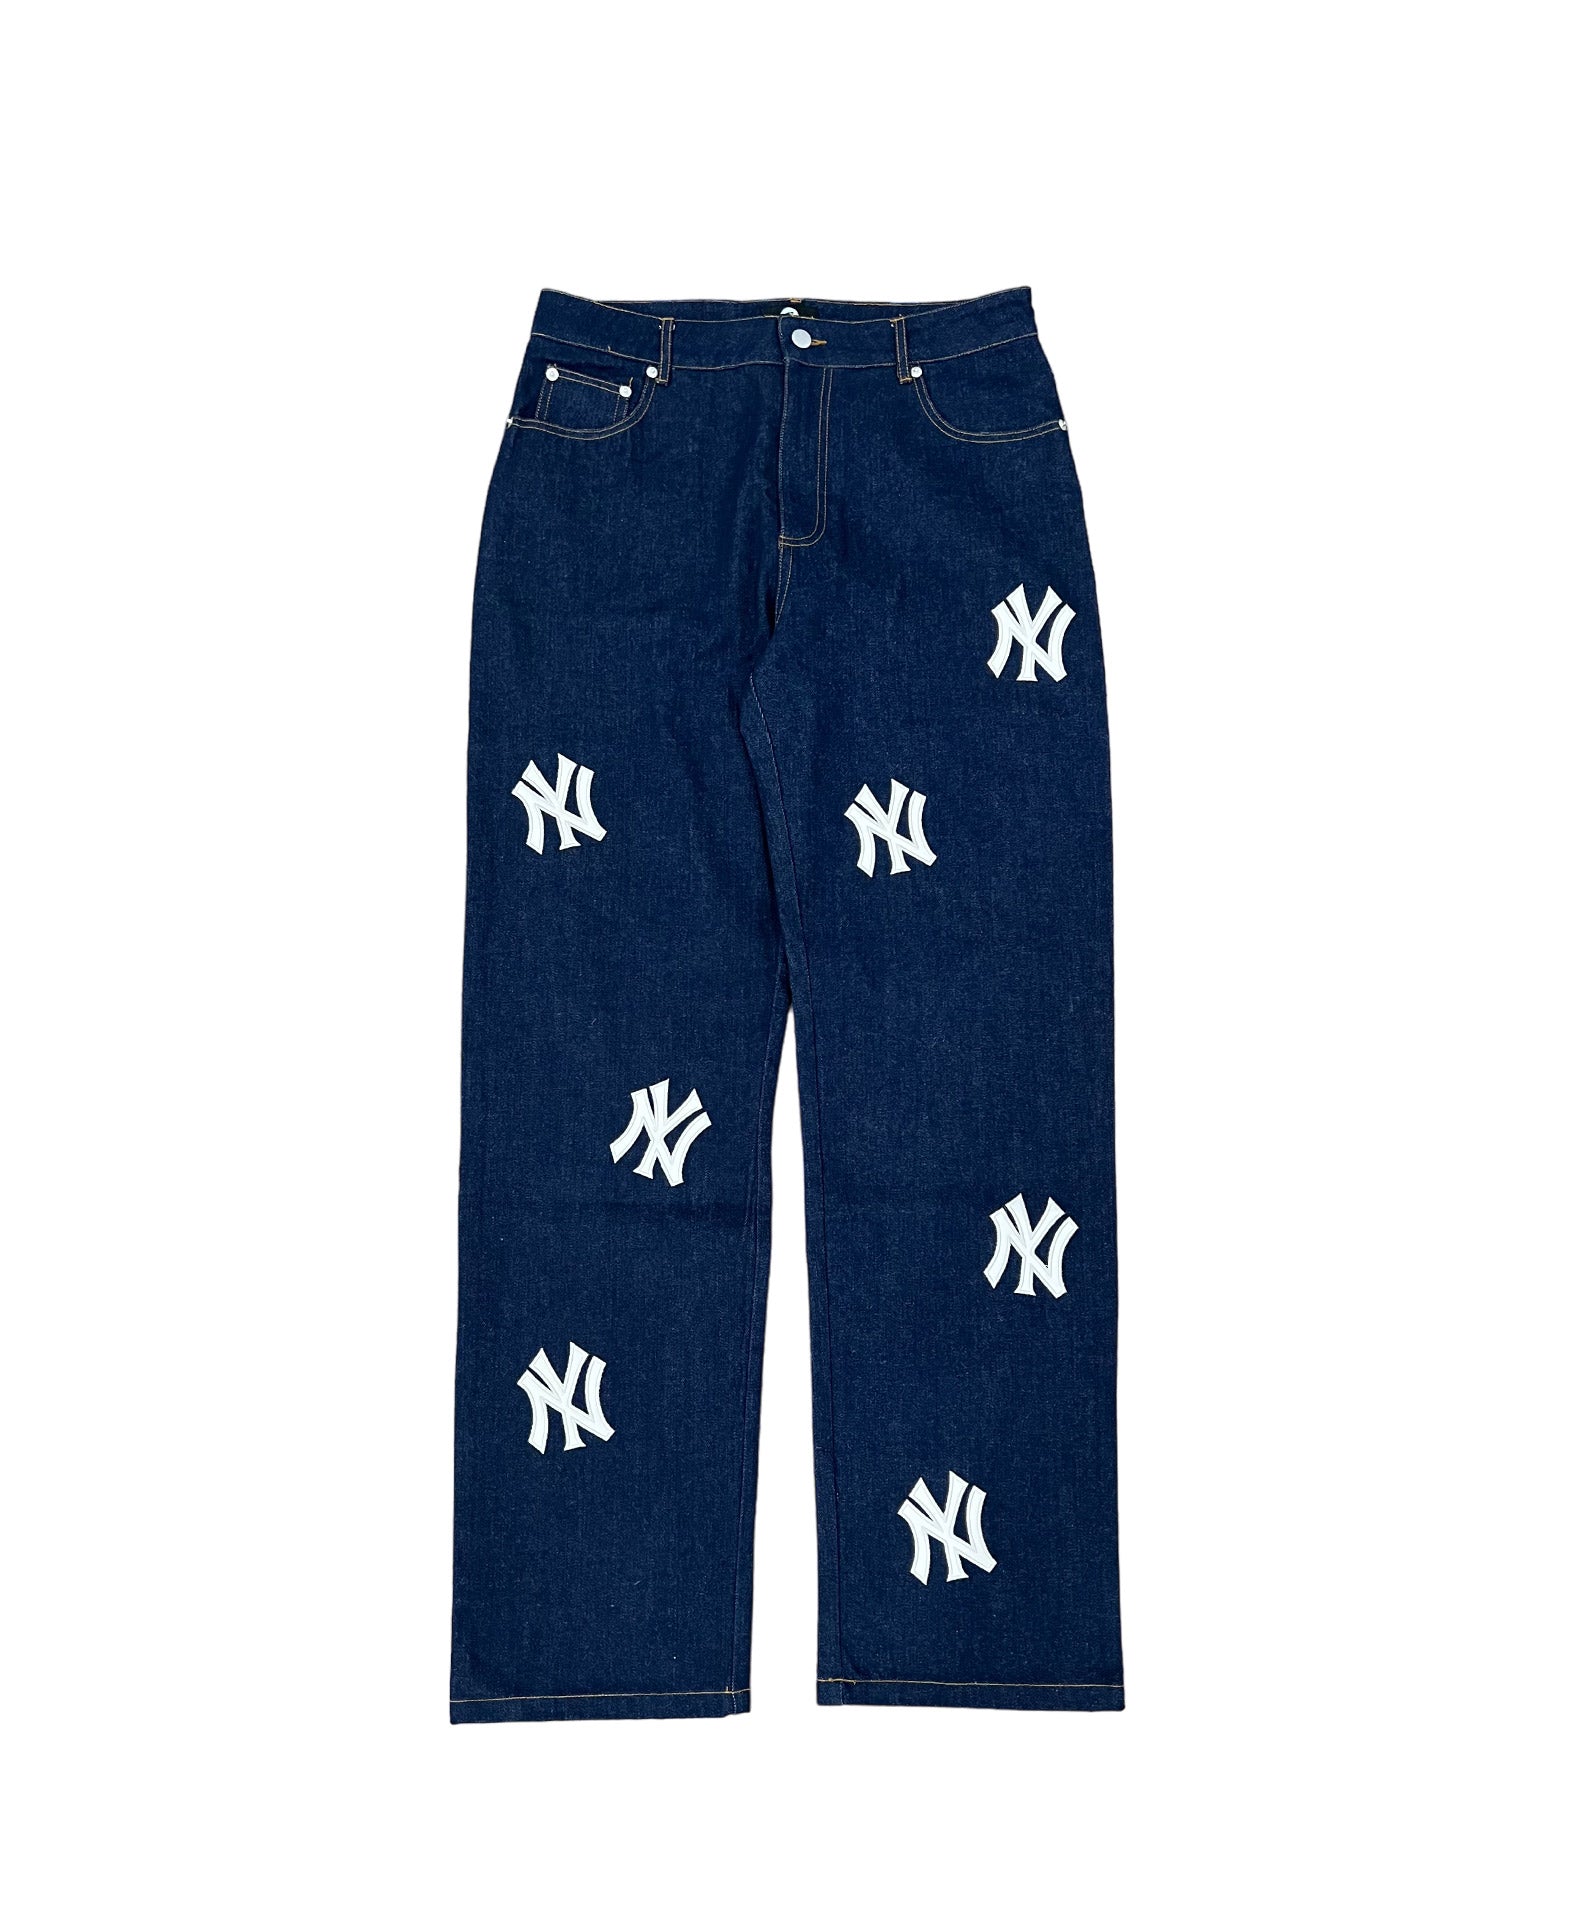 New York Patch Jeans - Navy